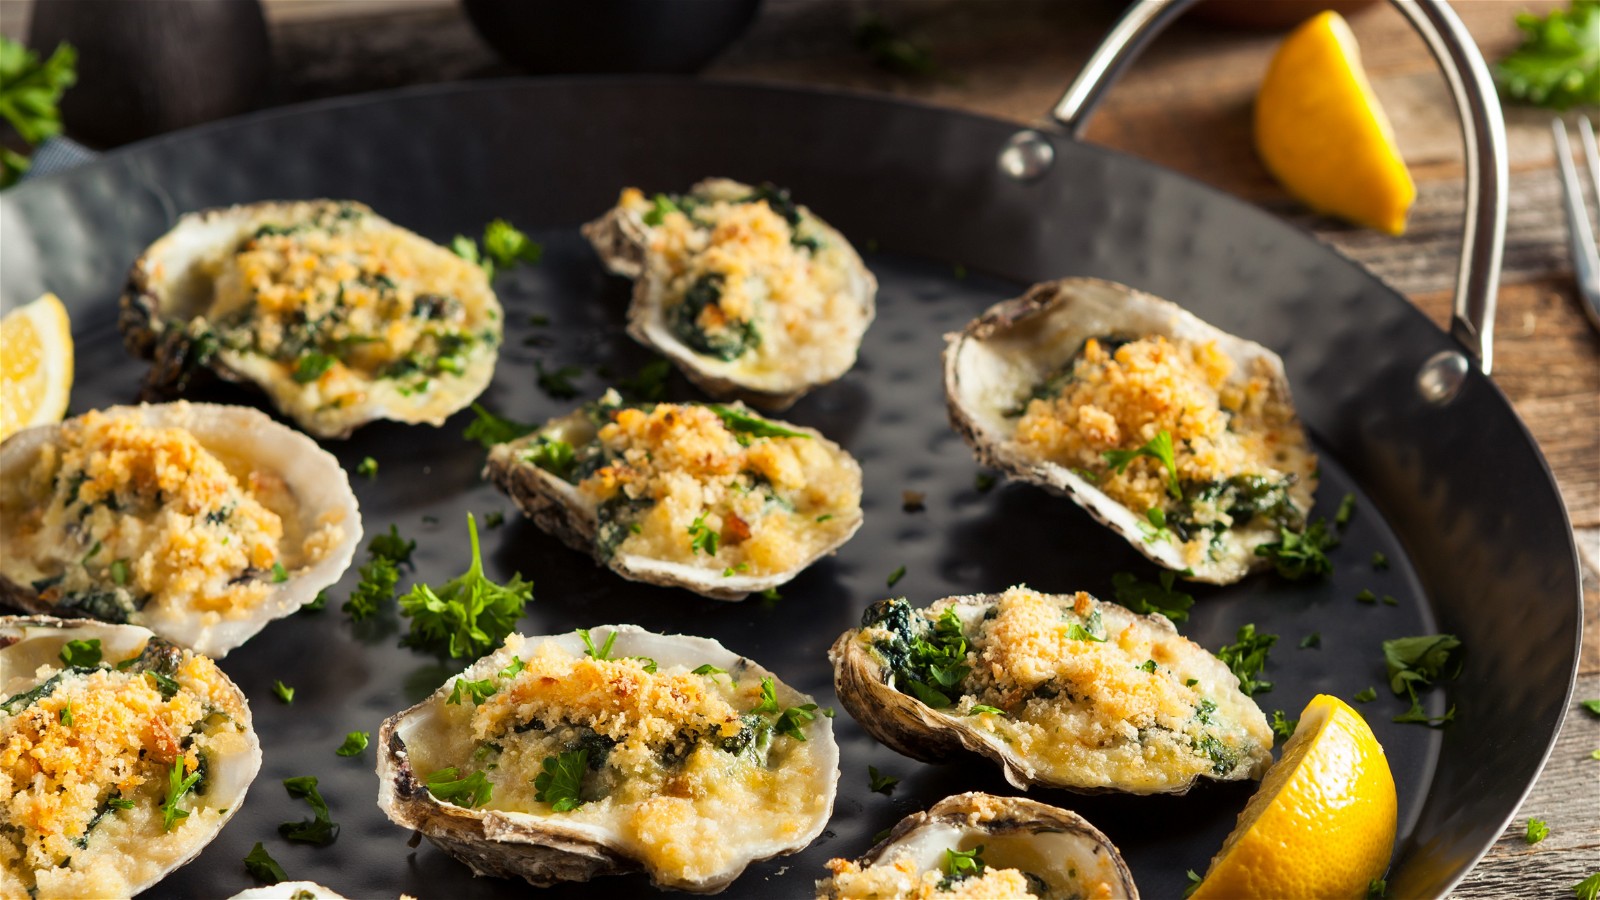 Image of True Chargrilled Oysters